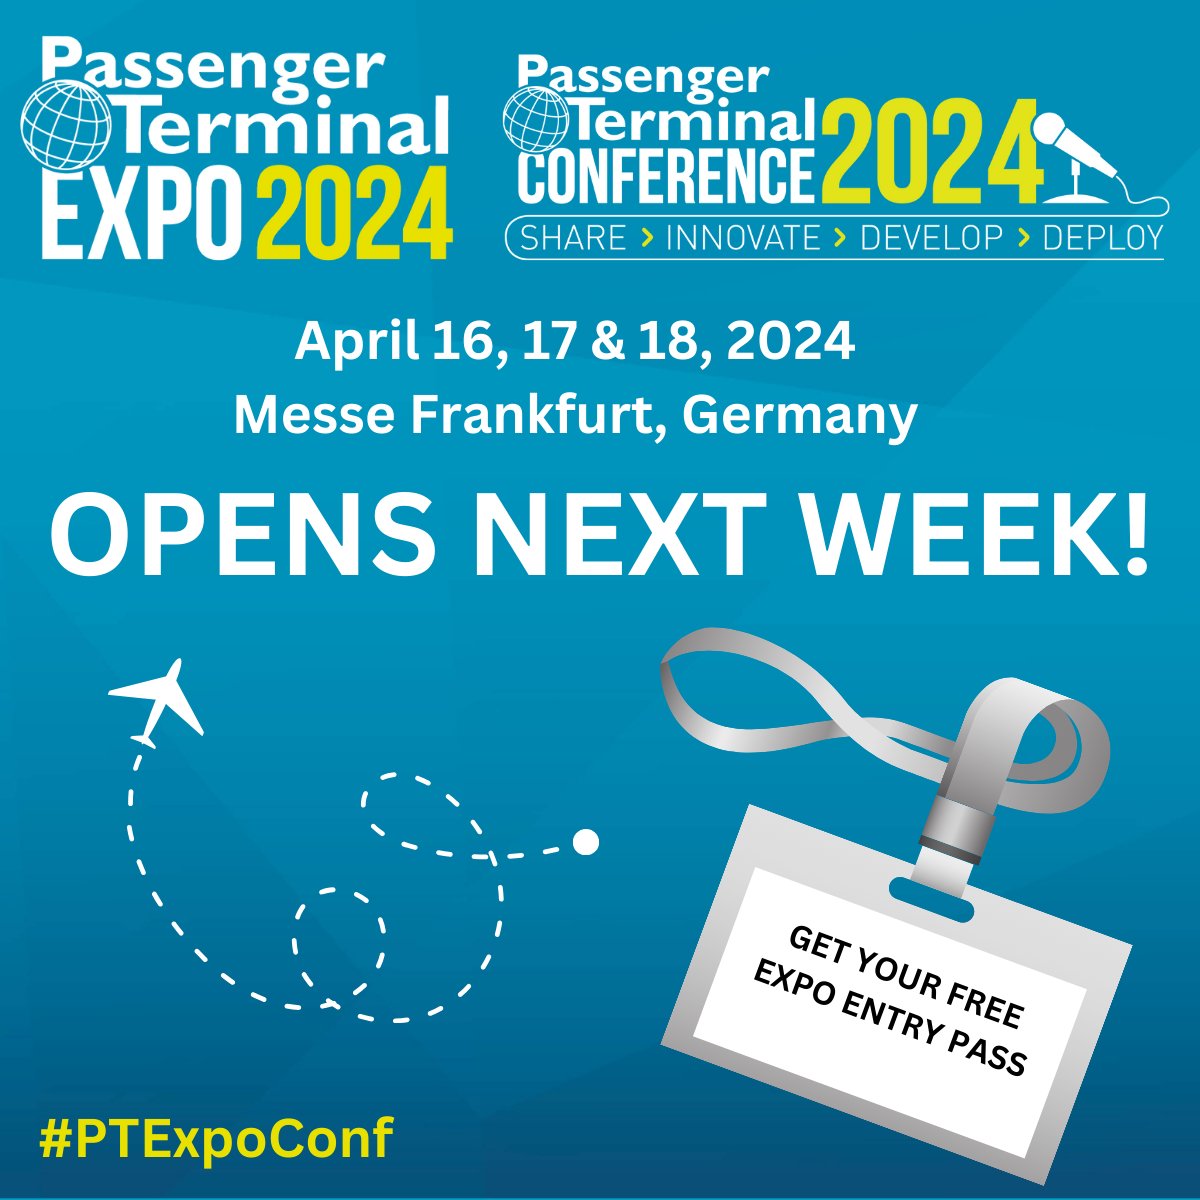 OPENS NEXT WEEK | #PTExpoConf opens next week! Taking place in Frankfurt – with the opportunity to meet over 300 leading exhibitors – don’t miss your chance to get your free exhibition entry pass! Secure your FREE FastTrack exhibition entry pass today: bit.ly/49Qf1Nd